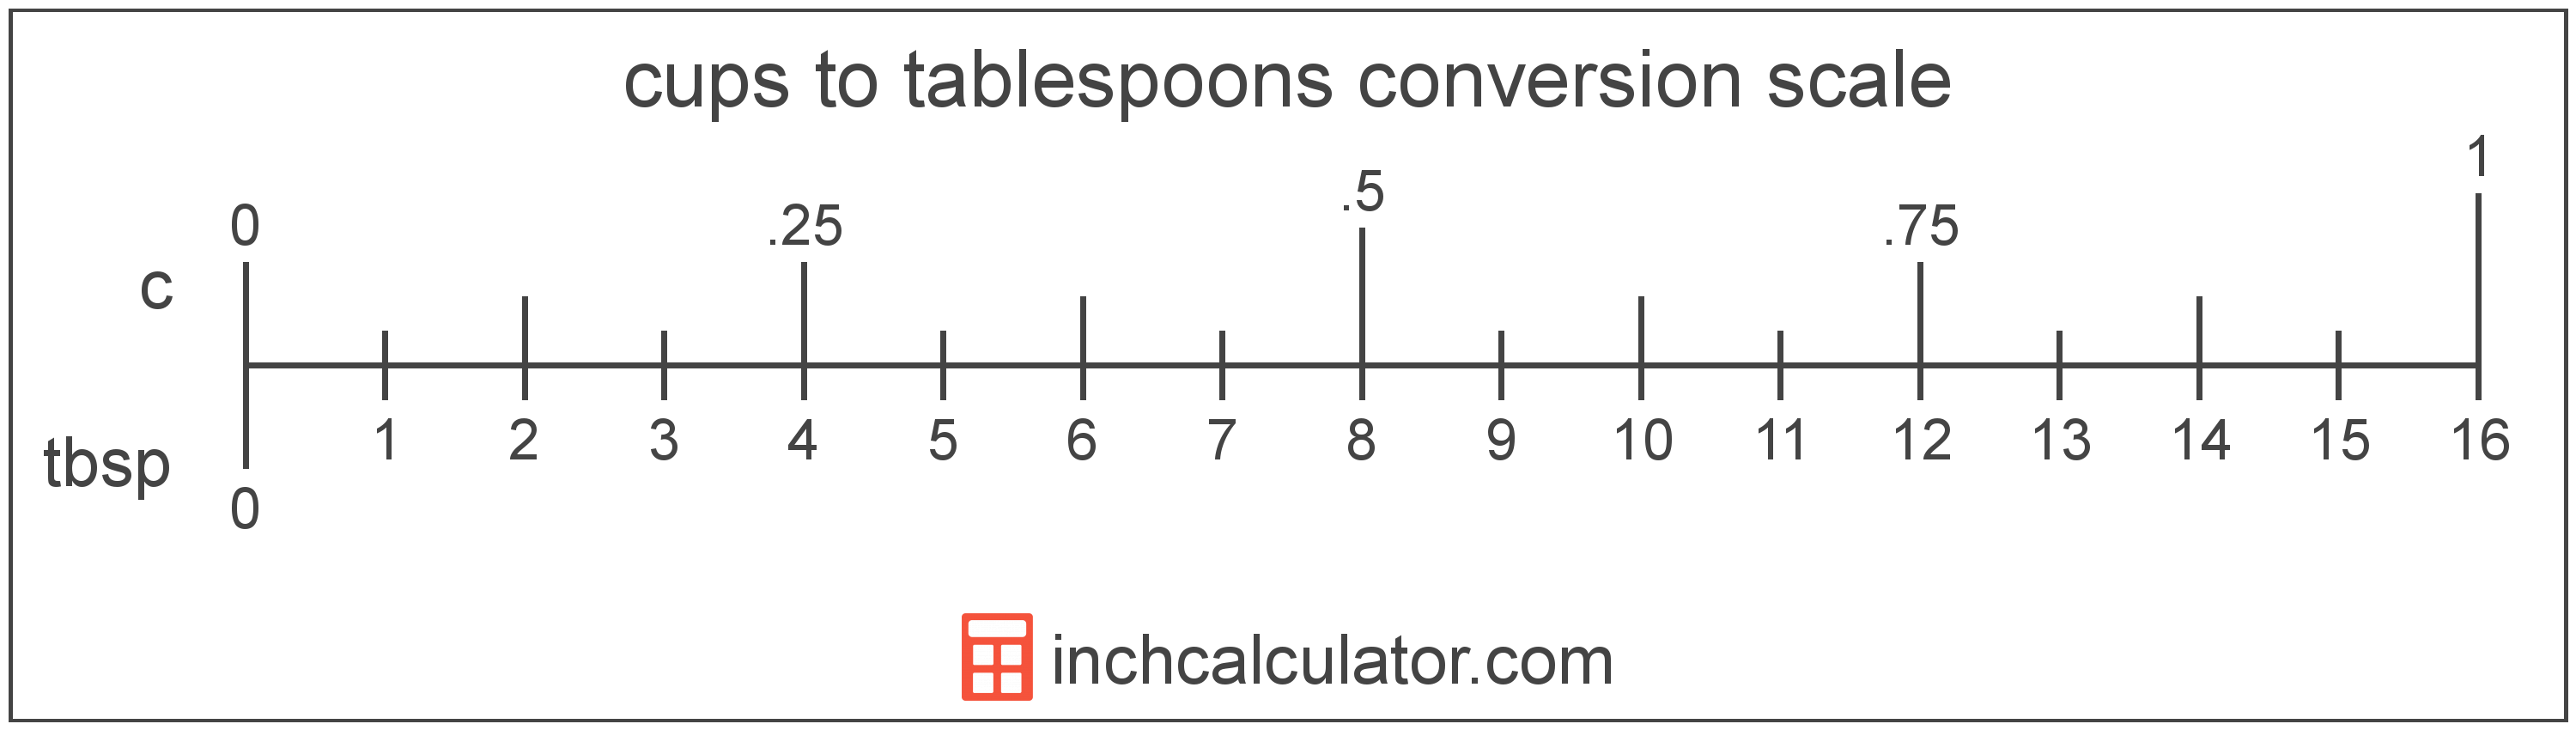 Tablespoons to Cups Conversion (tbsp to c) - Inch Calculator